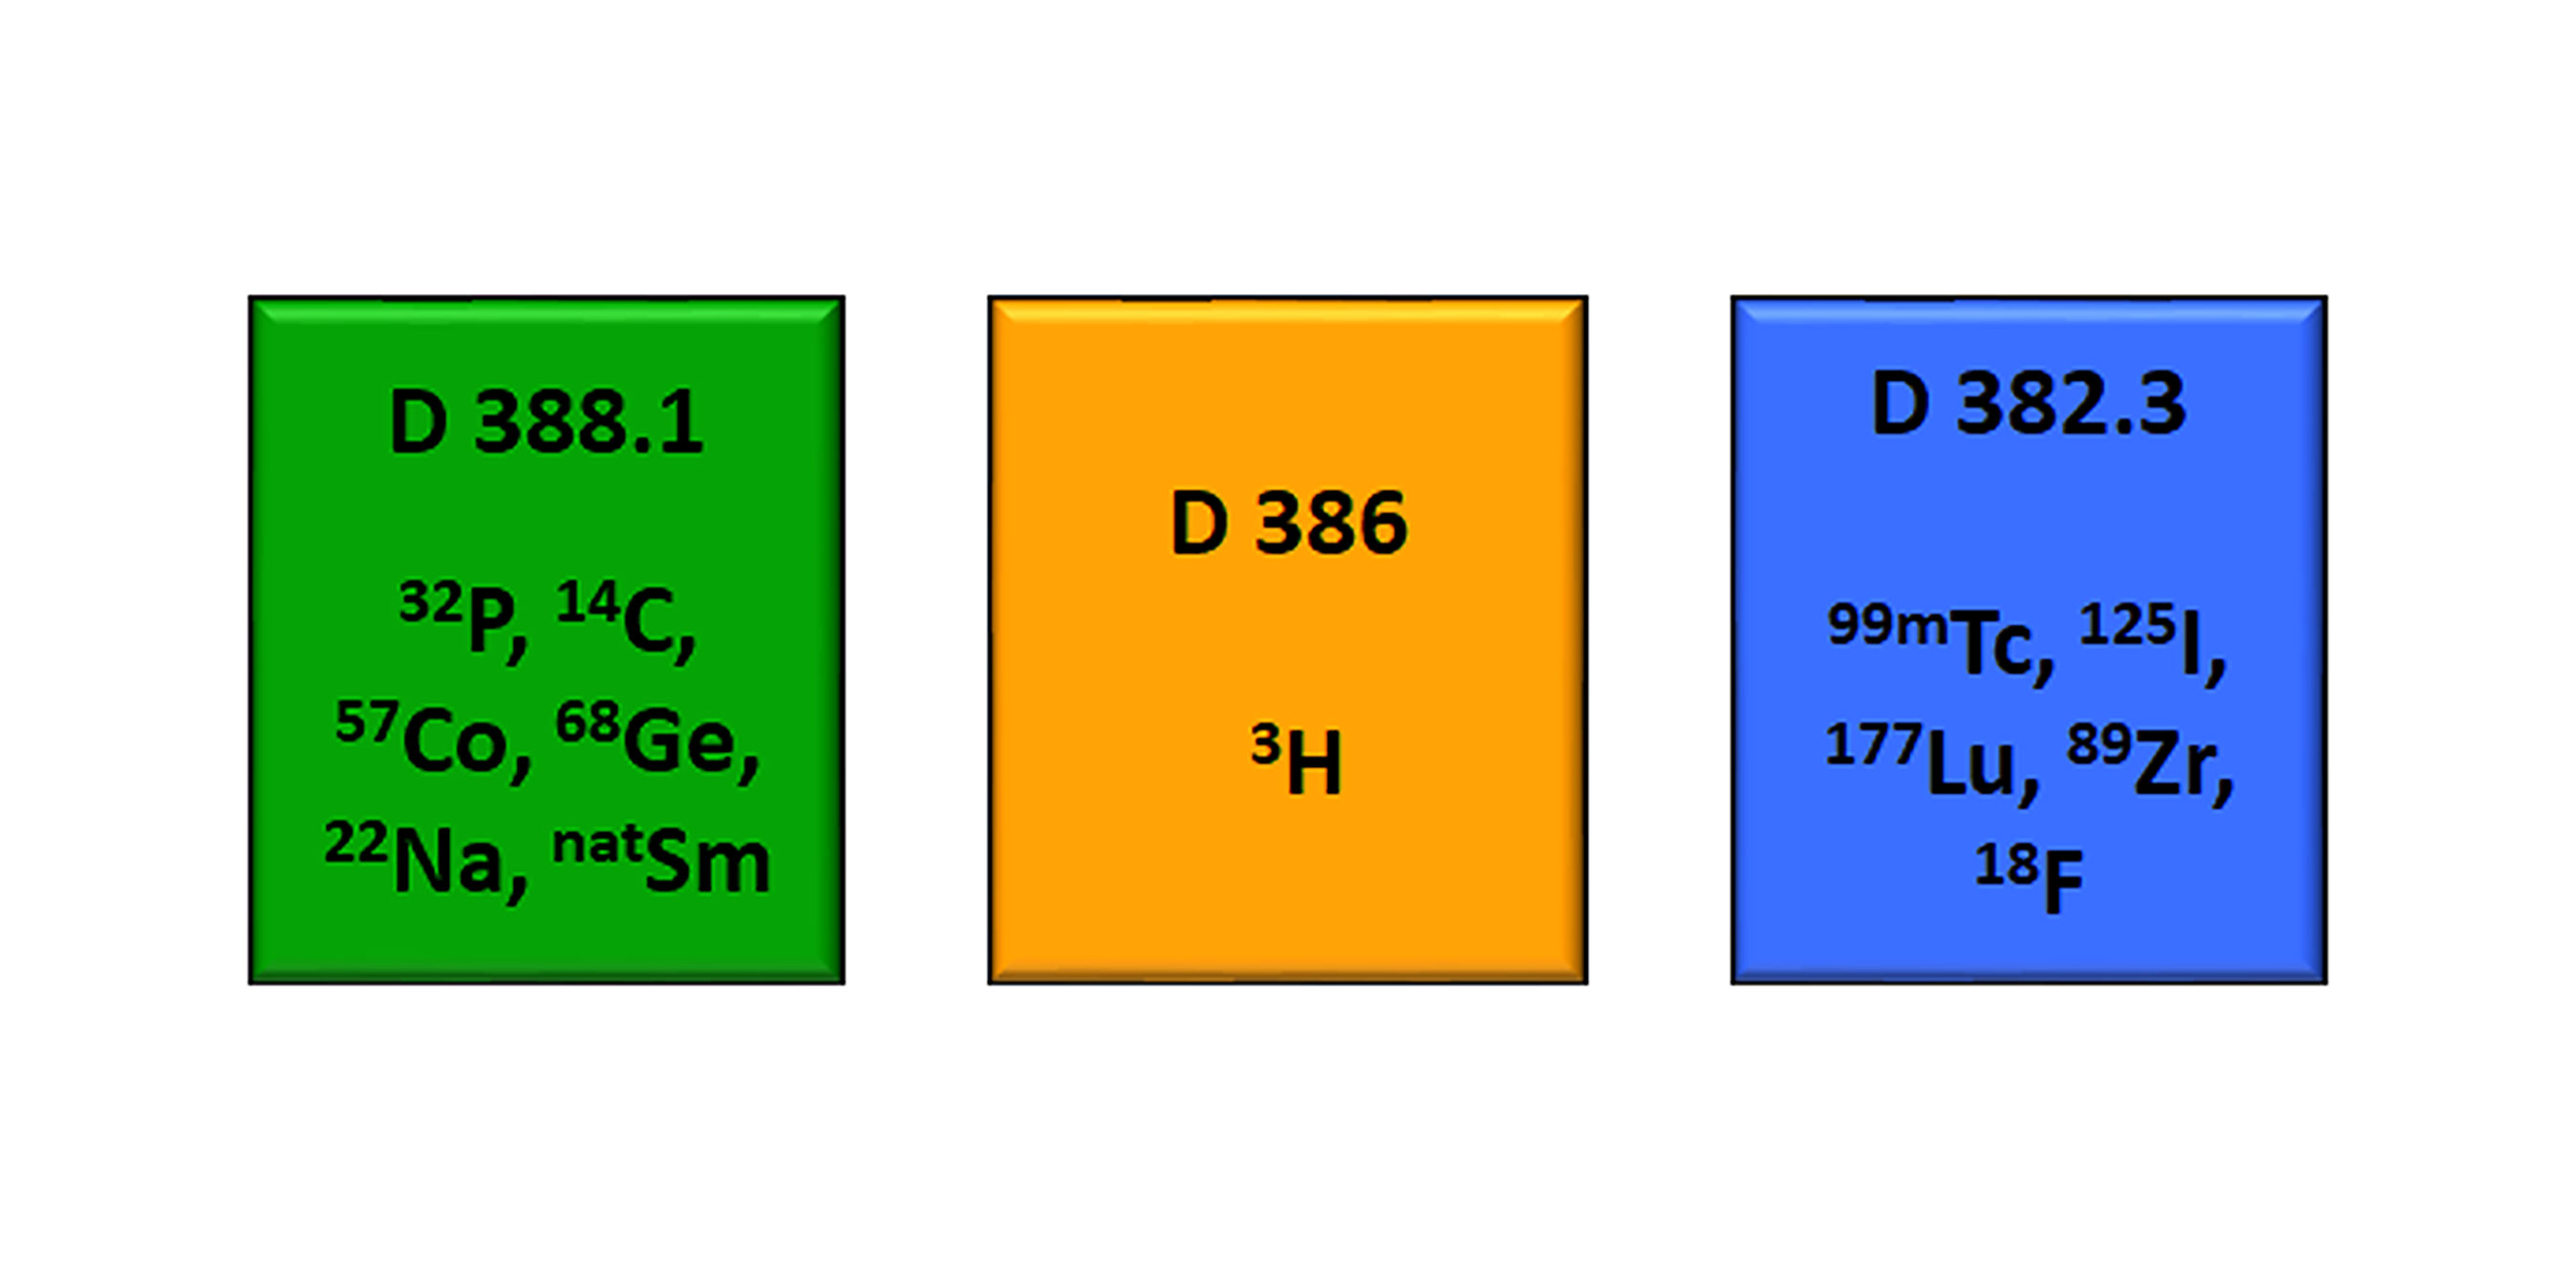 Enlarged view: Overview of the three different labs D388.1, D386 and D382.3 with the different isotopes that can be used in these rooms